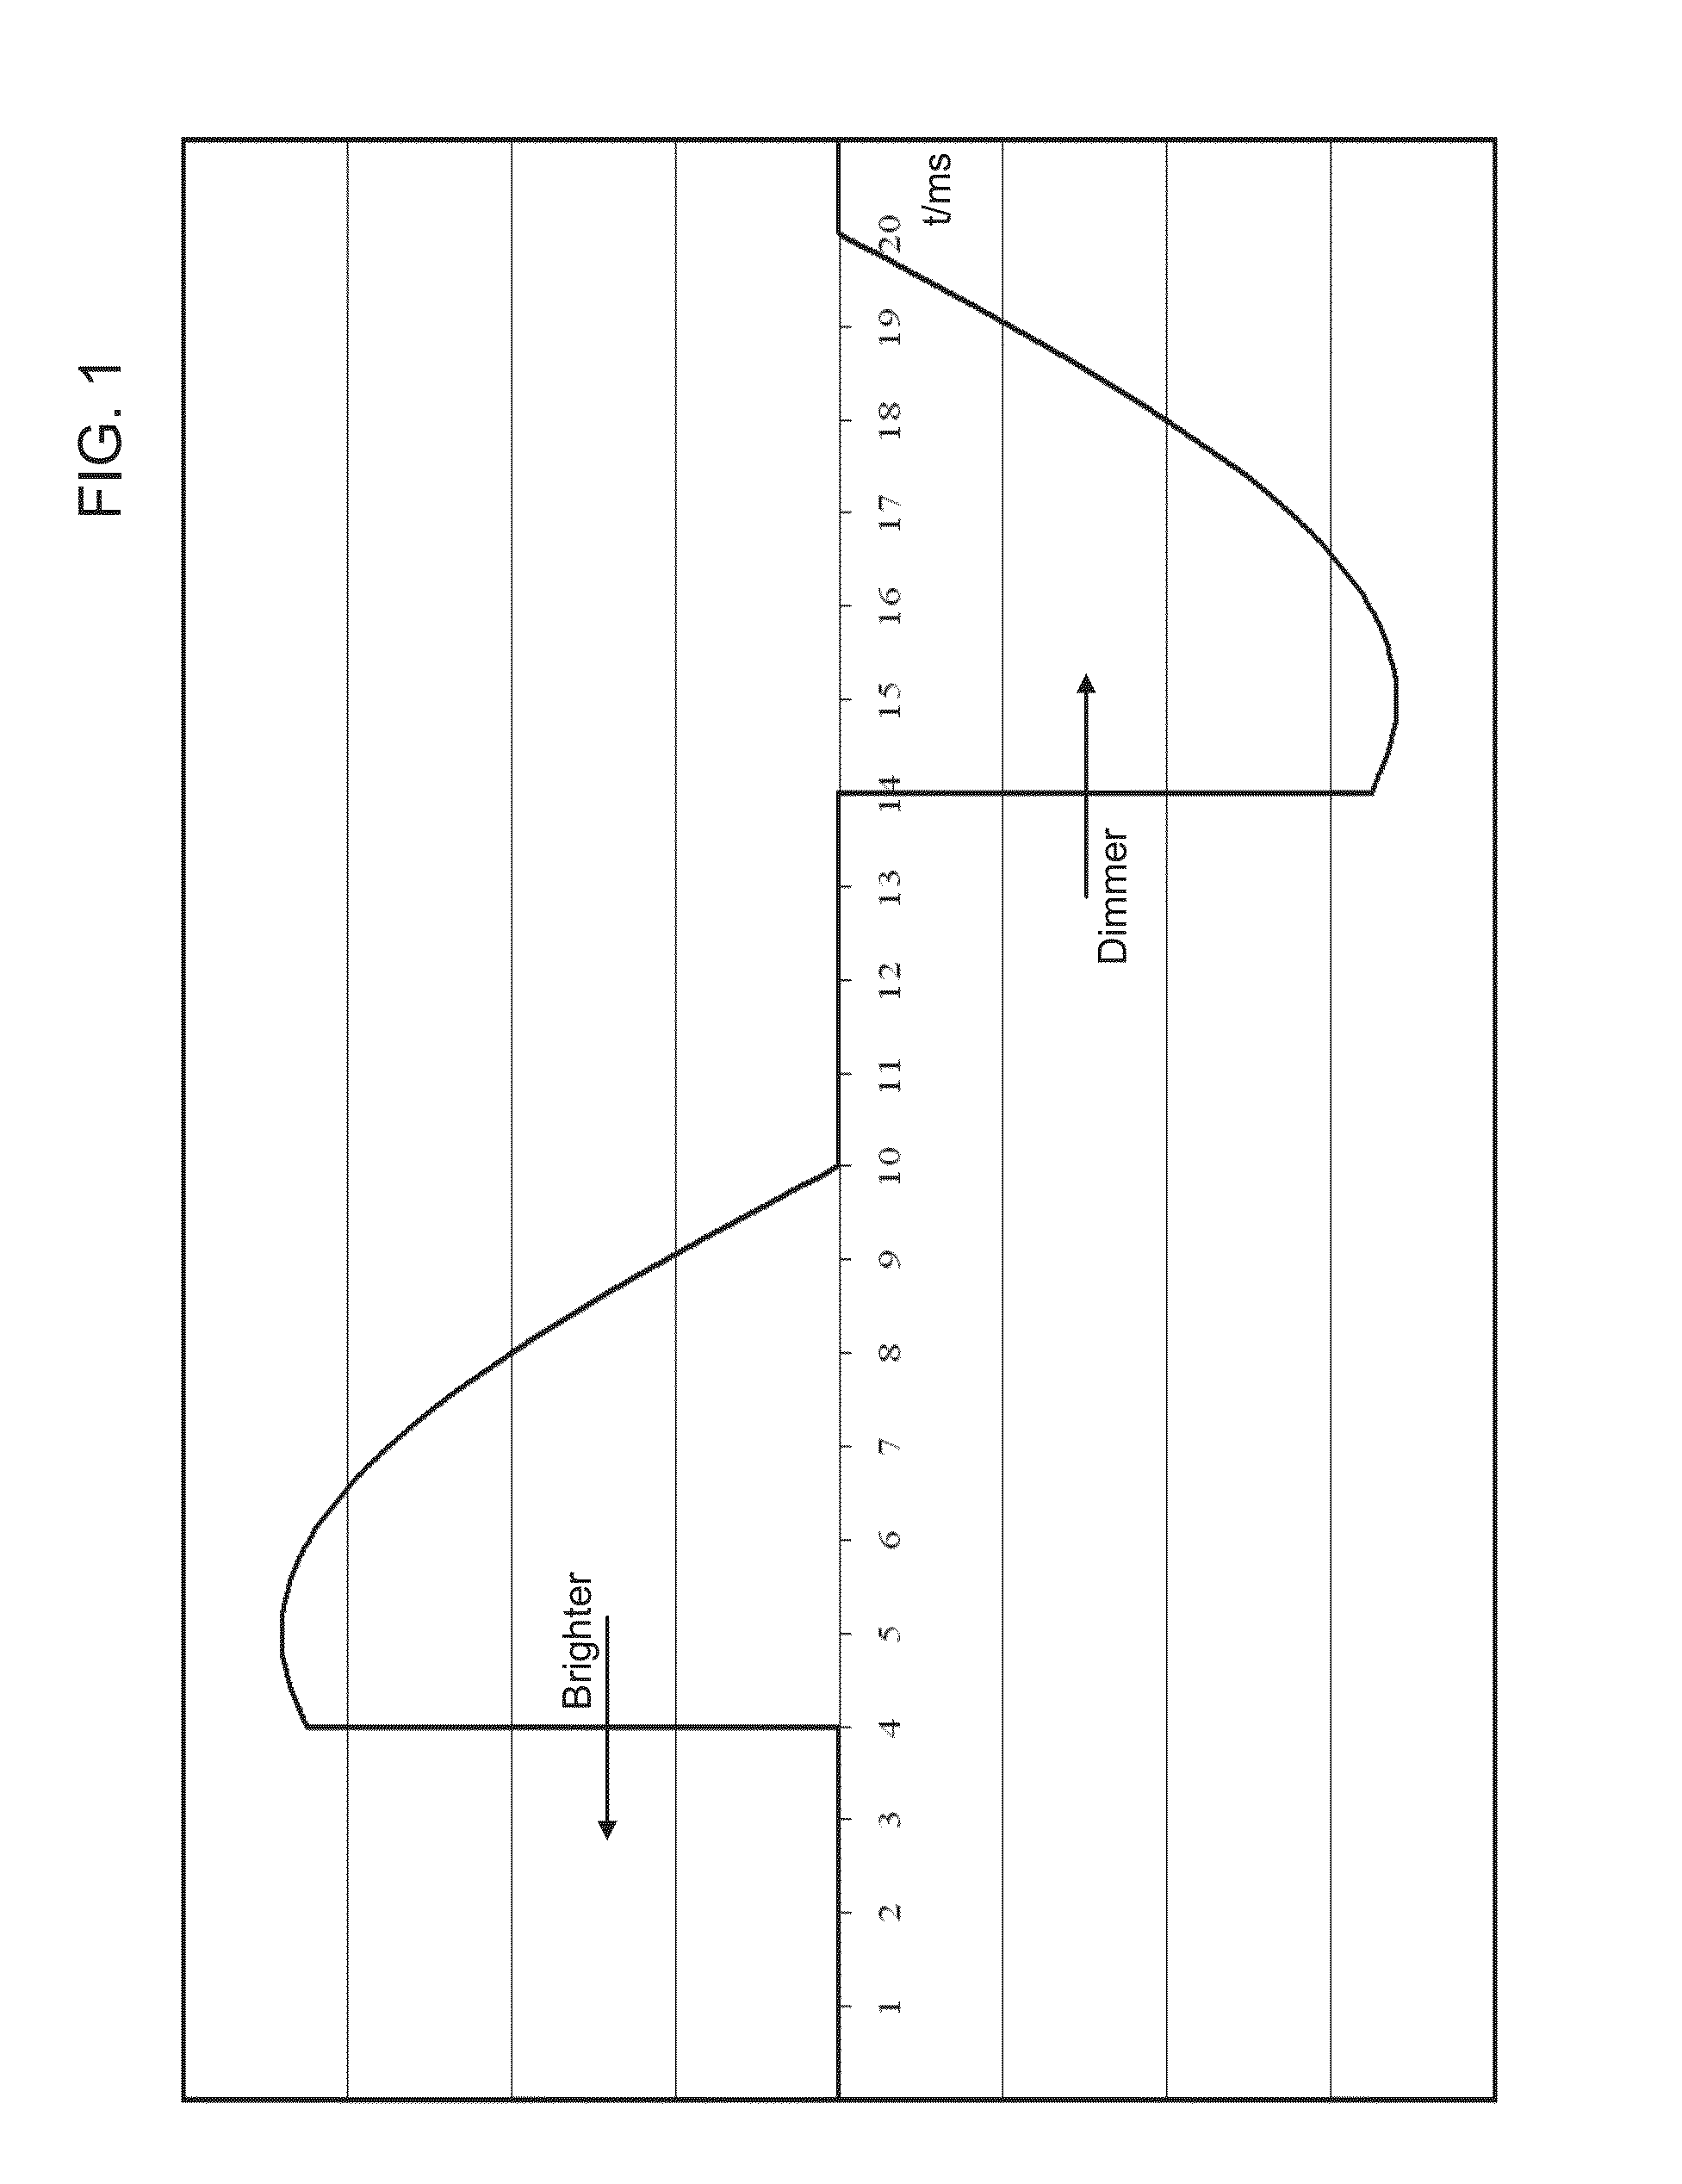 Control circuit and method